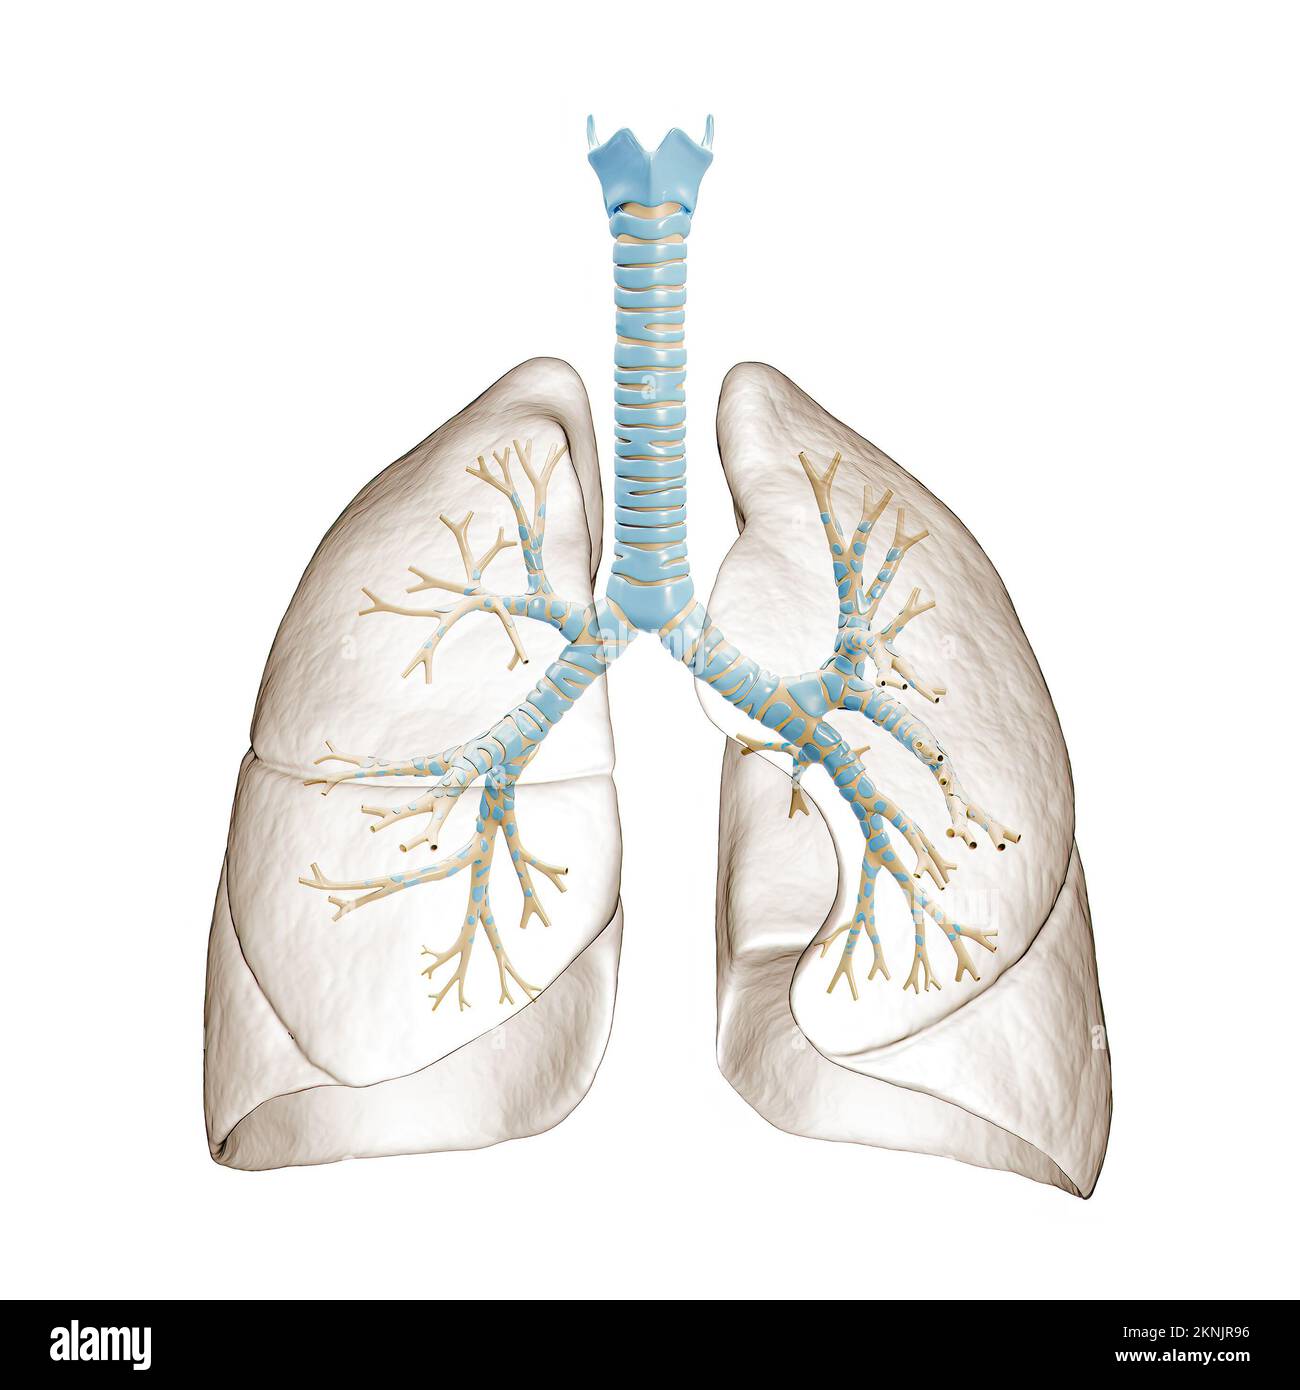 Human lungs with bronchial tree or trachea with bronchi 3D rendering illustration. Blank anatomical diagram or chart on white background. Medical, hea Stock Photo